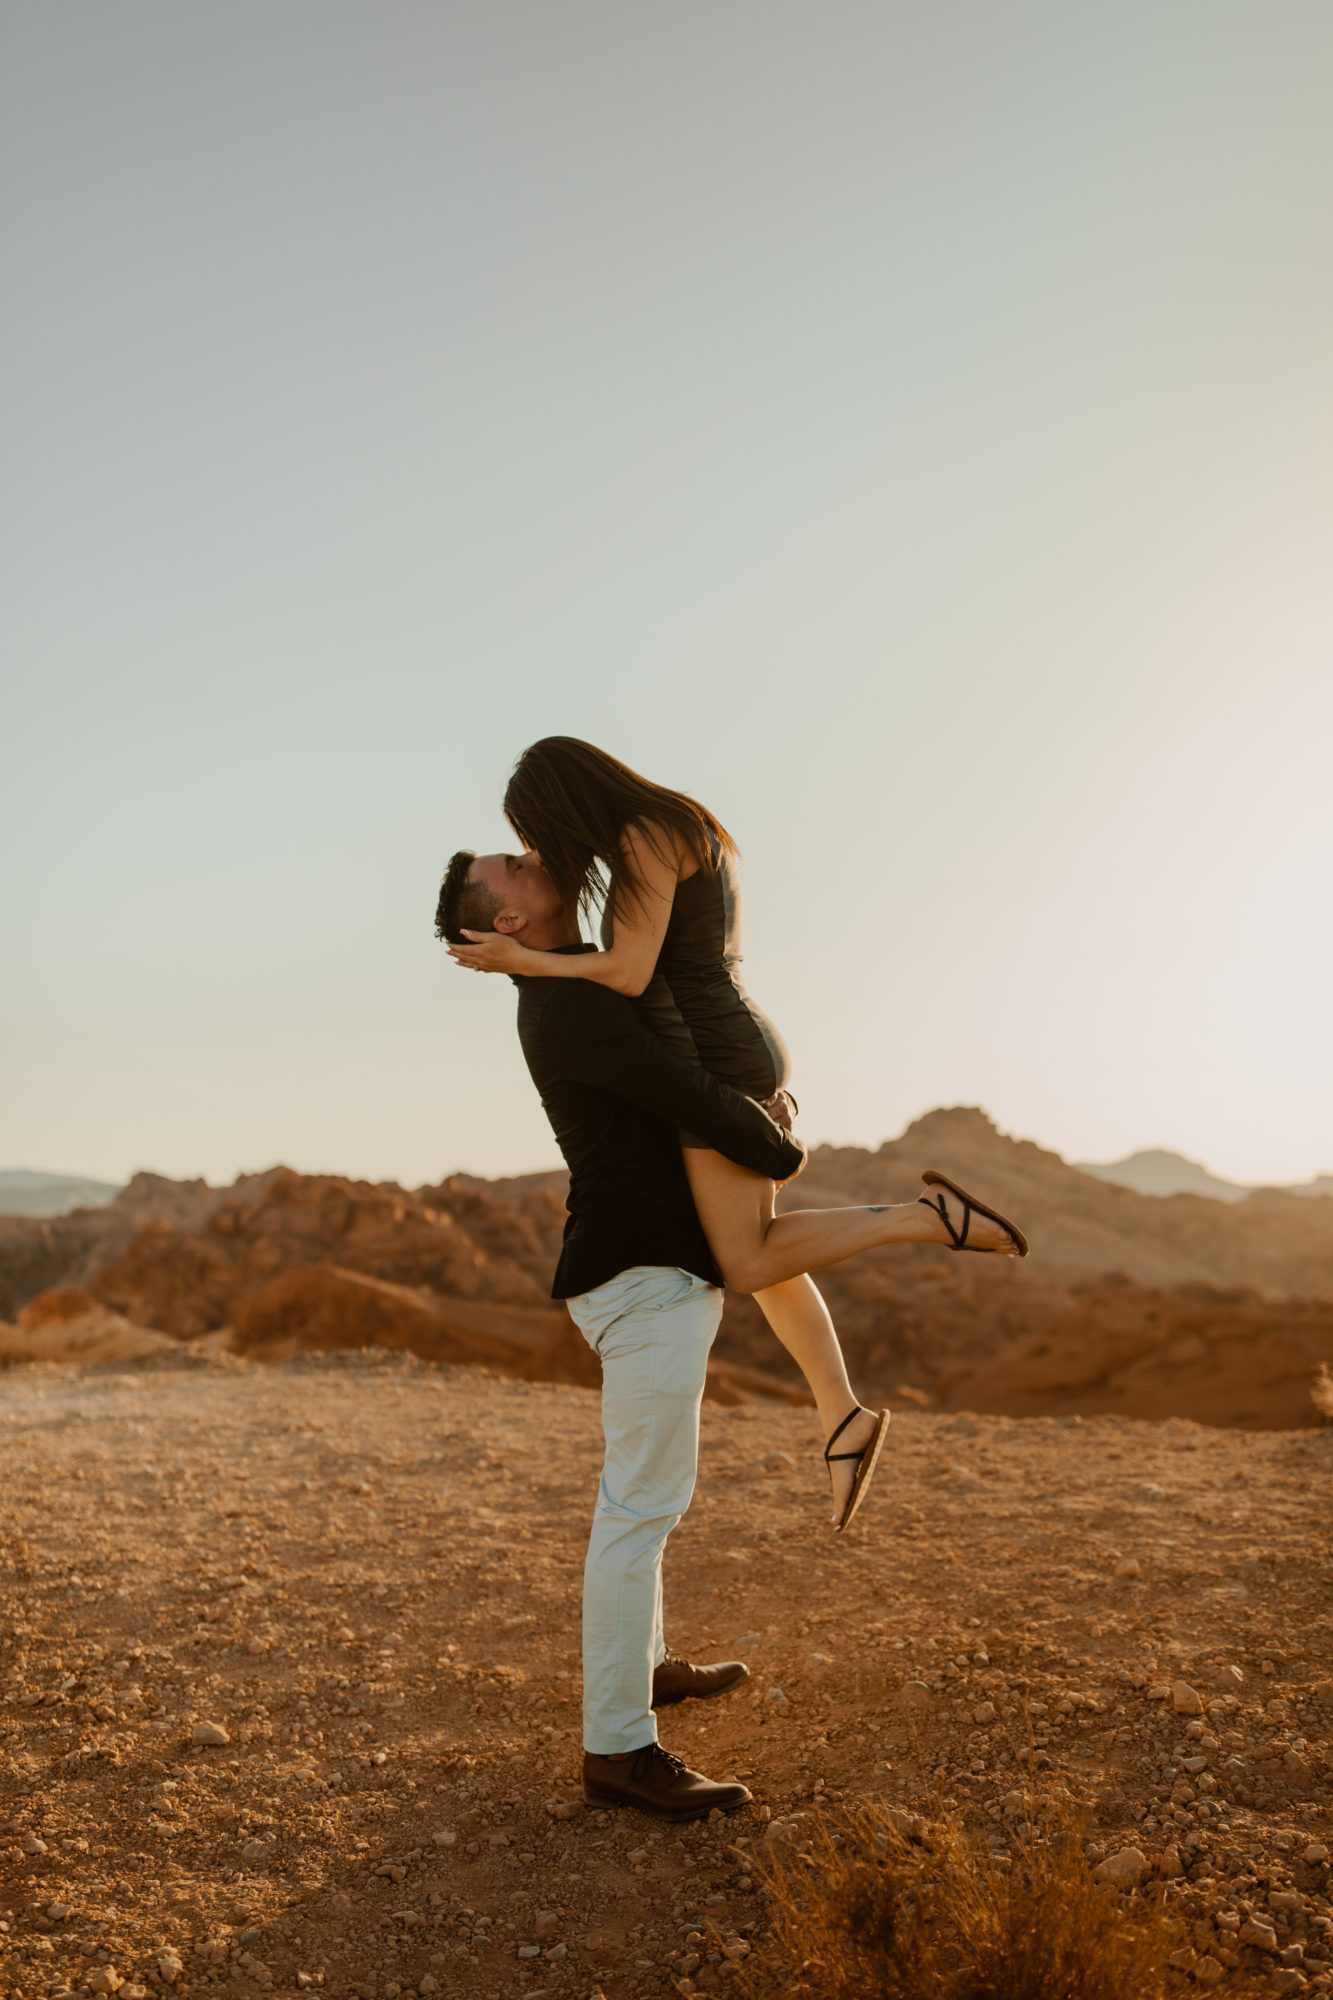 fiance picking his girl friend up and kissing her after he just propsed to her in the desert at sunset